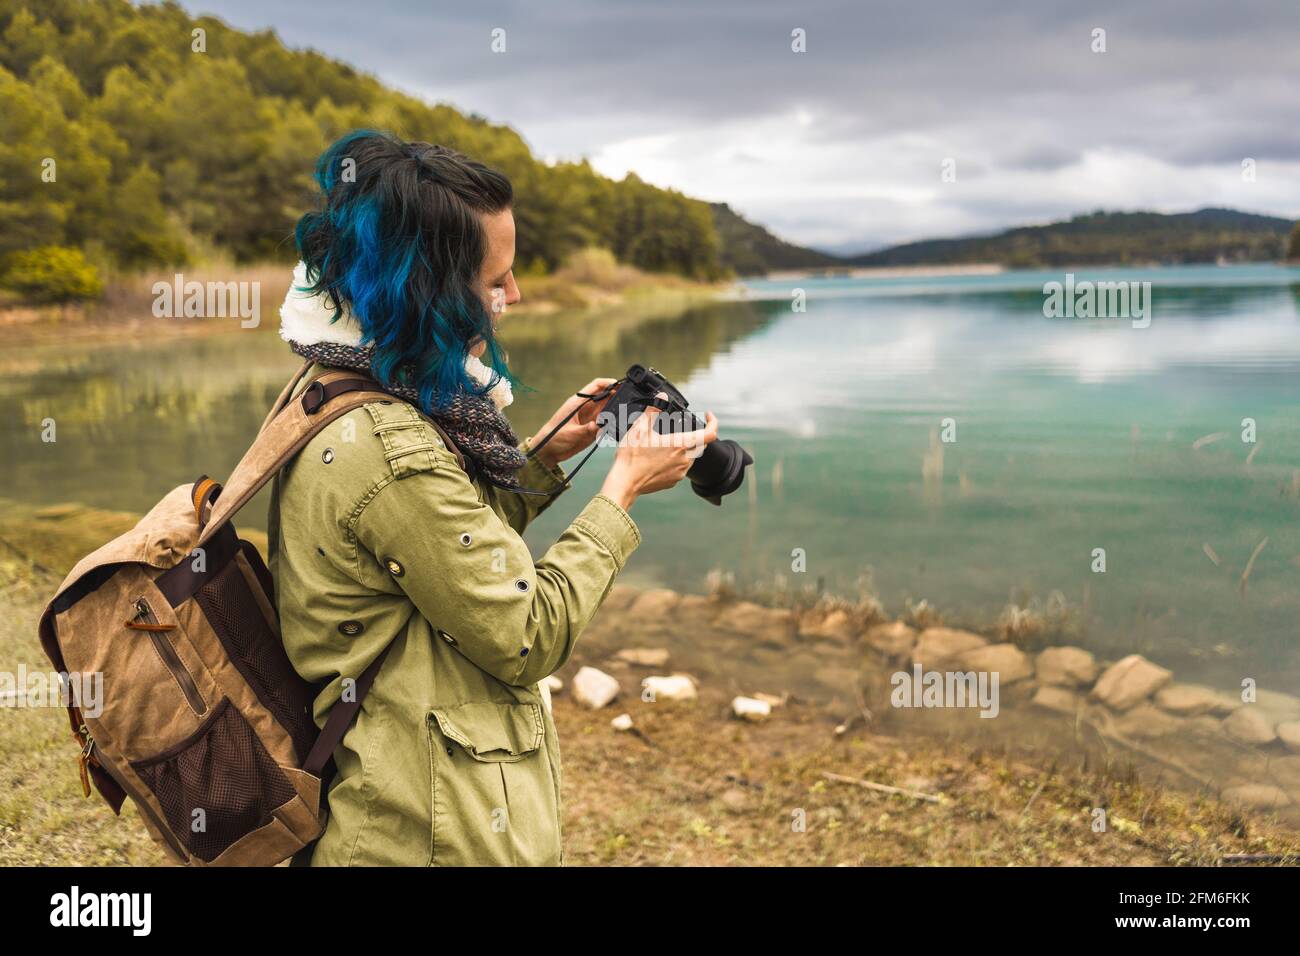 Tourist with bag in nature taking pictures at lakeshore Stock Photo